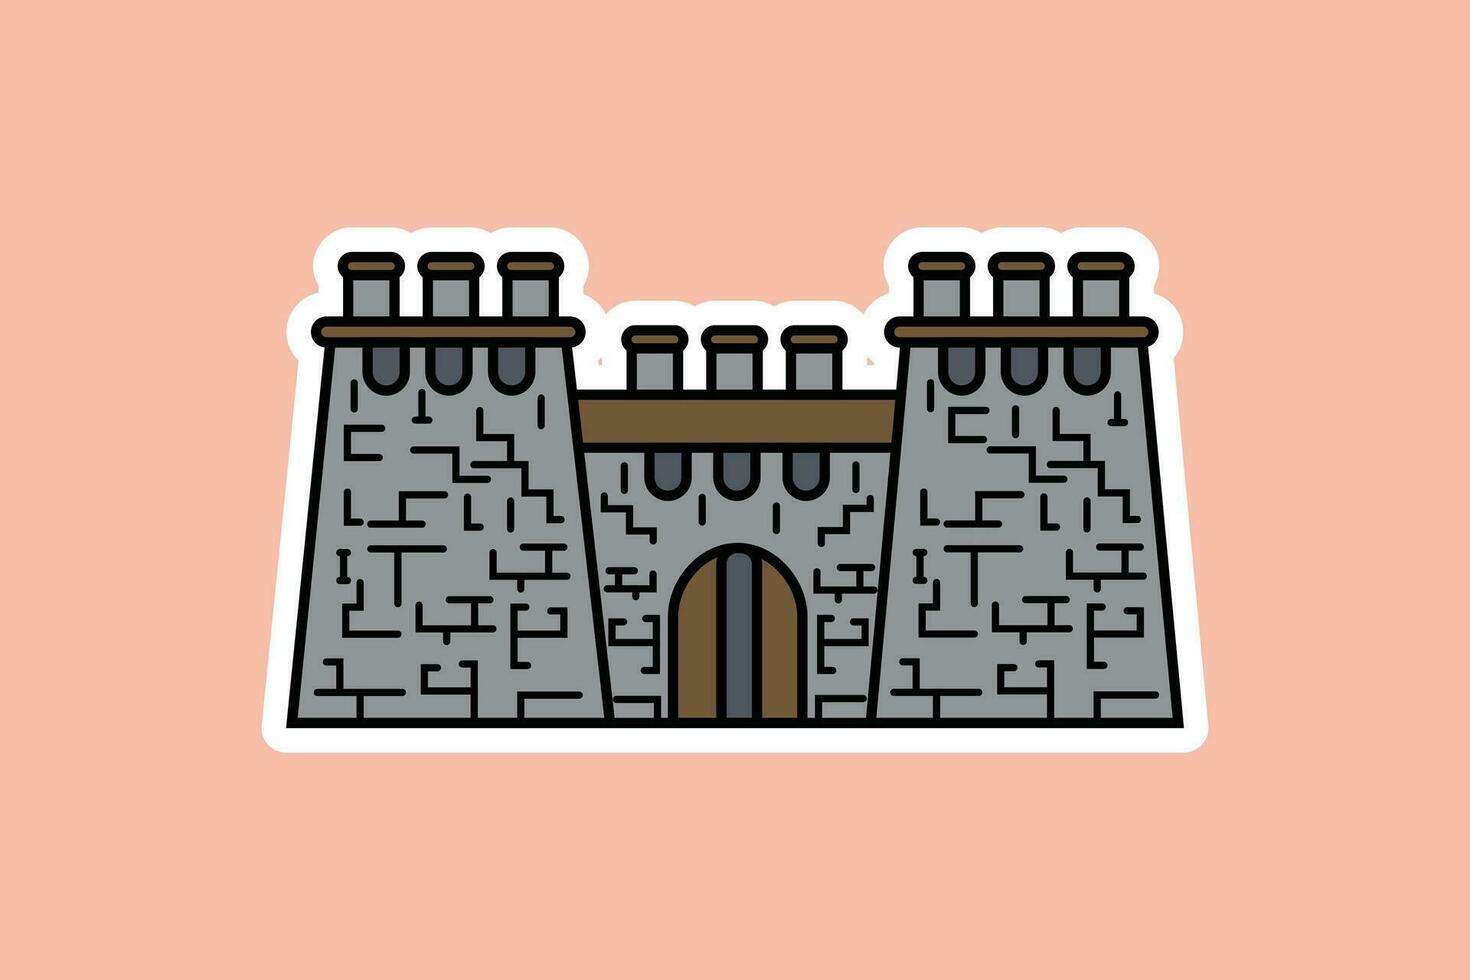 Stone Castle Tower Building Sticker vector illustration. Building Landmark object icon concept. Abstract castle tower sticker design logo with shadow.